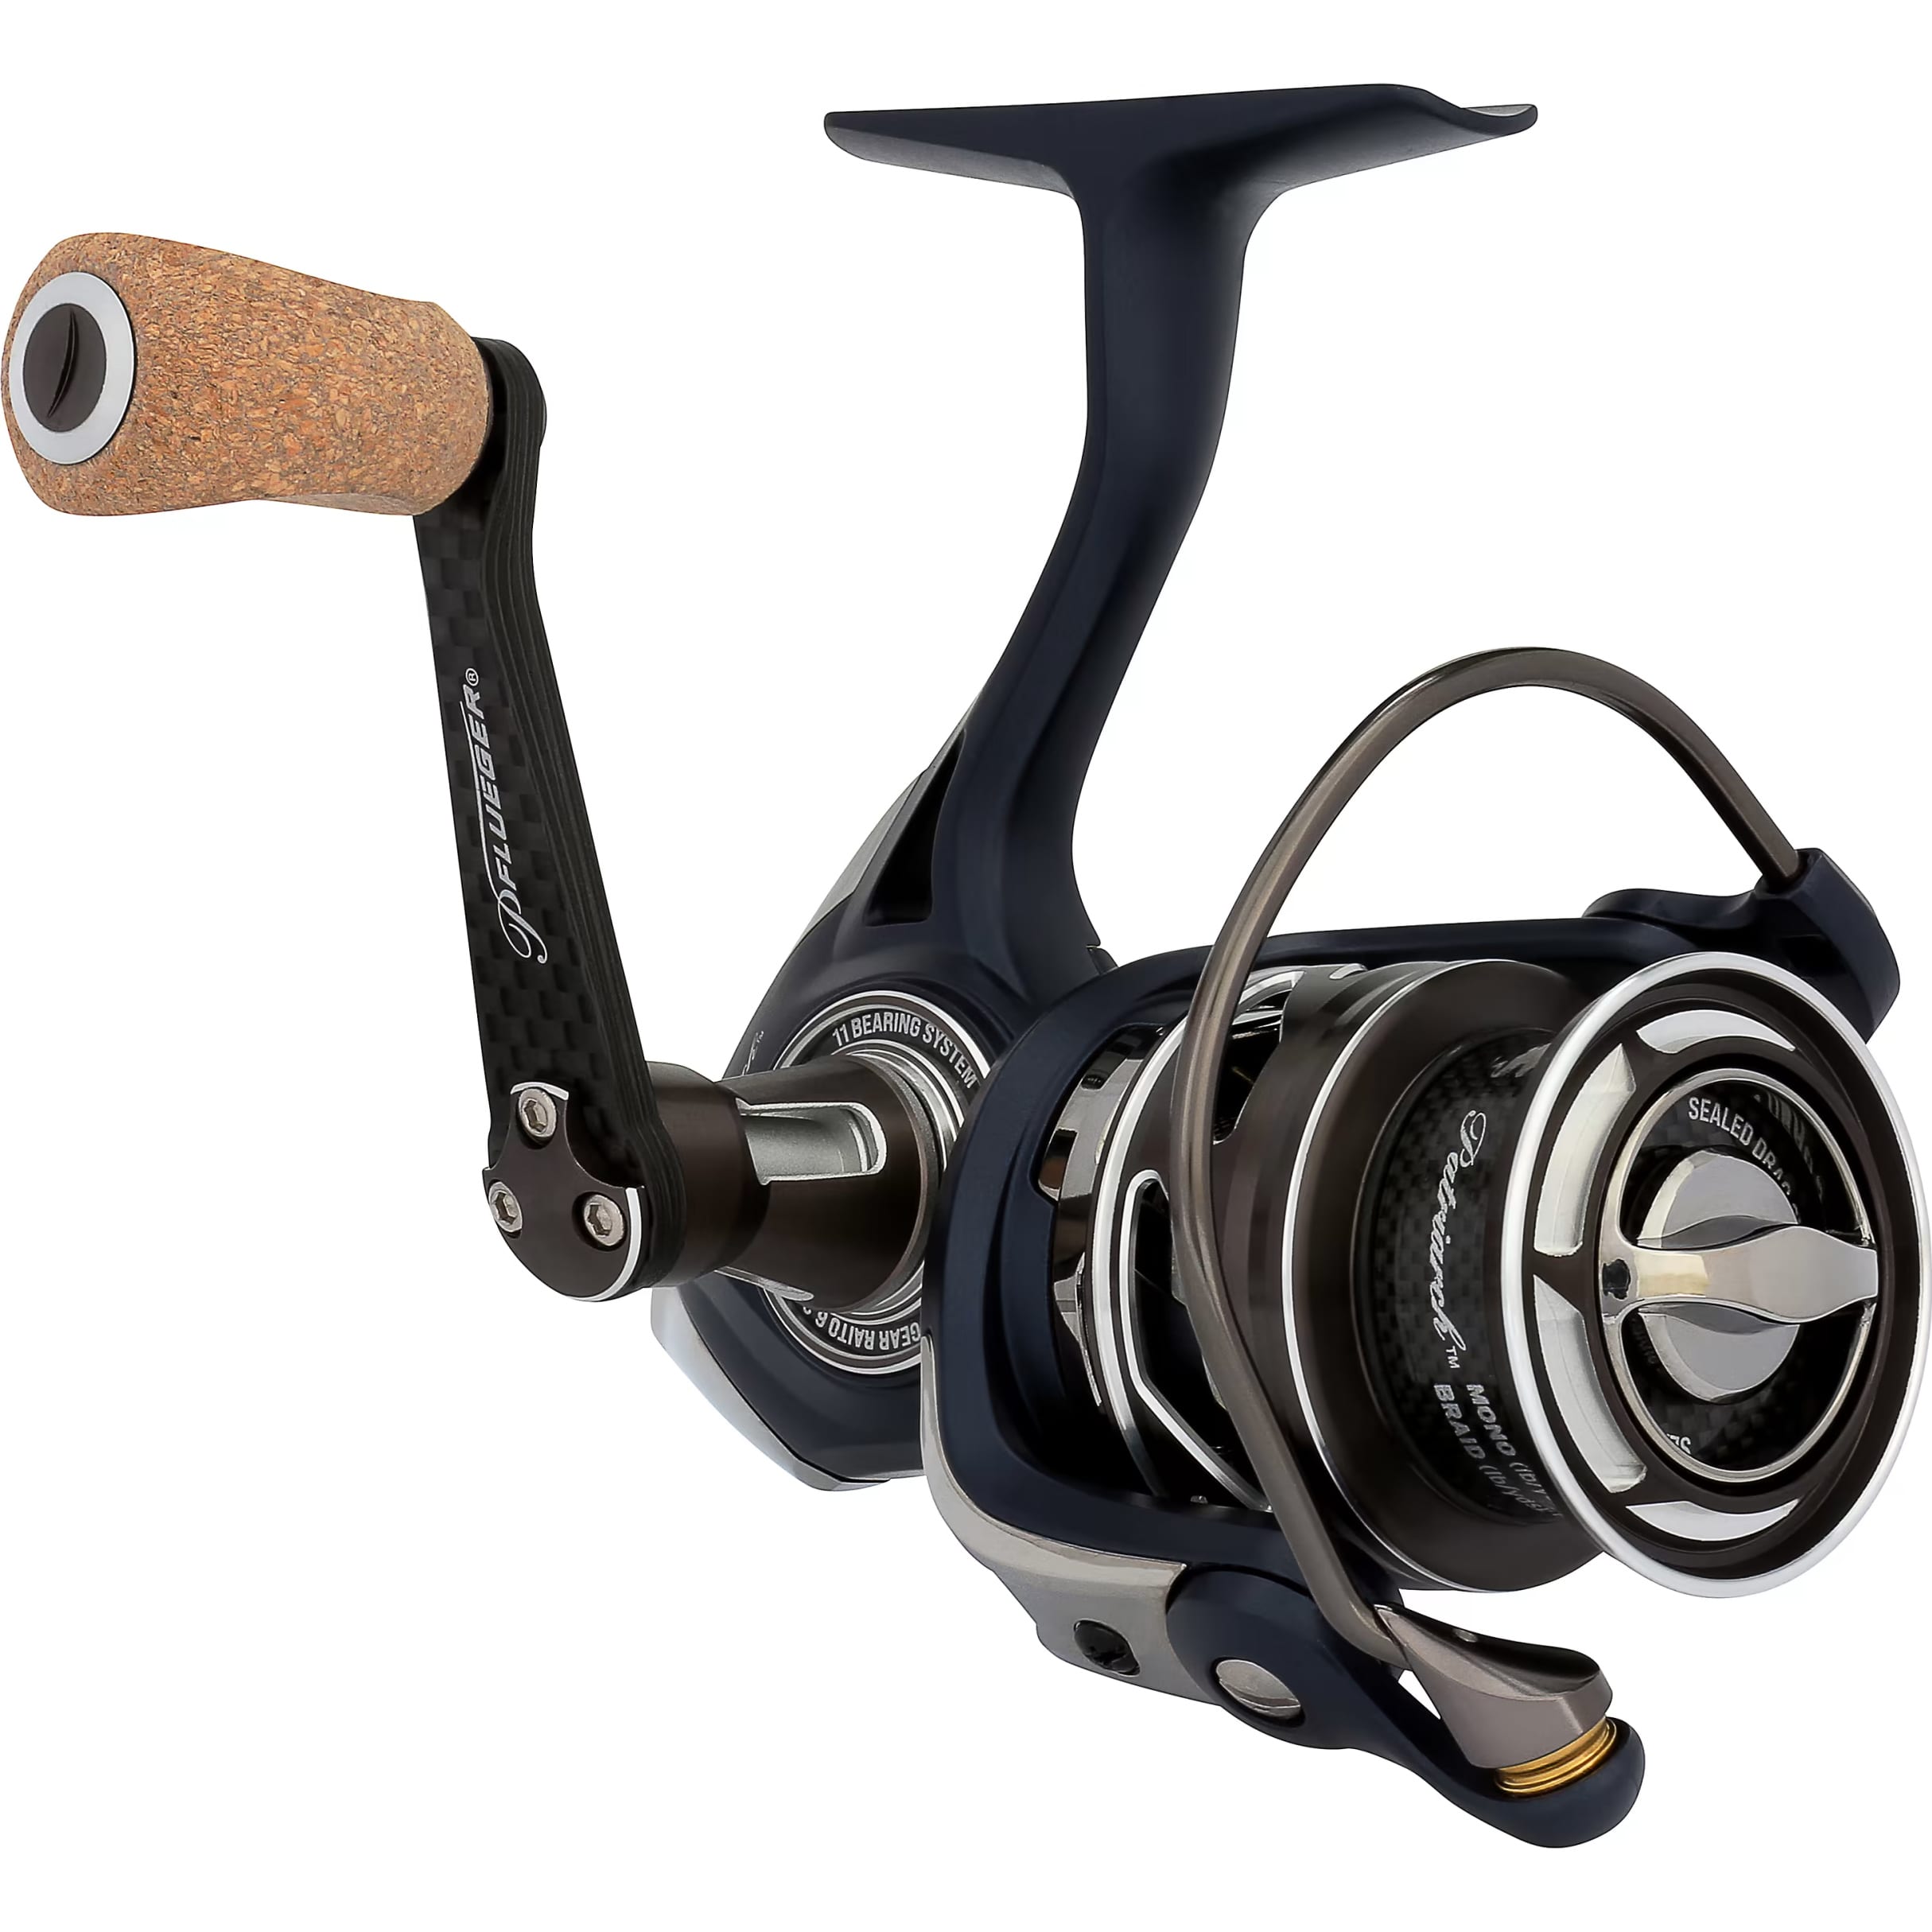  Pflueger President XT Spinning Fishing Reel, Size 20, 7  Stainless Steel Ball Bearing System, Sealed Oil Felt Front Drag, Carbon  Body with Machined Aluminum Main Shaft and Gear